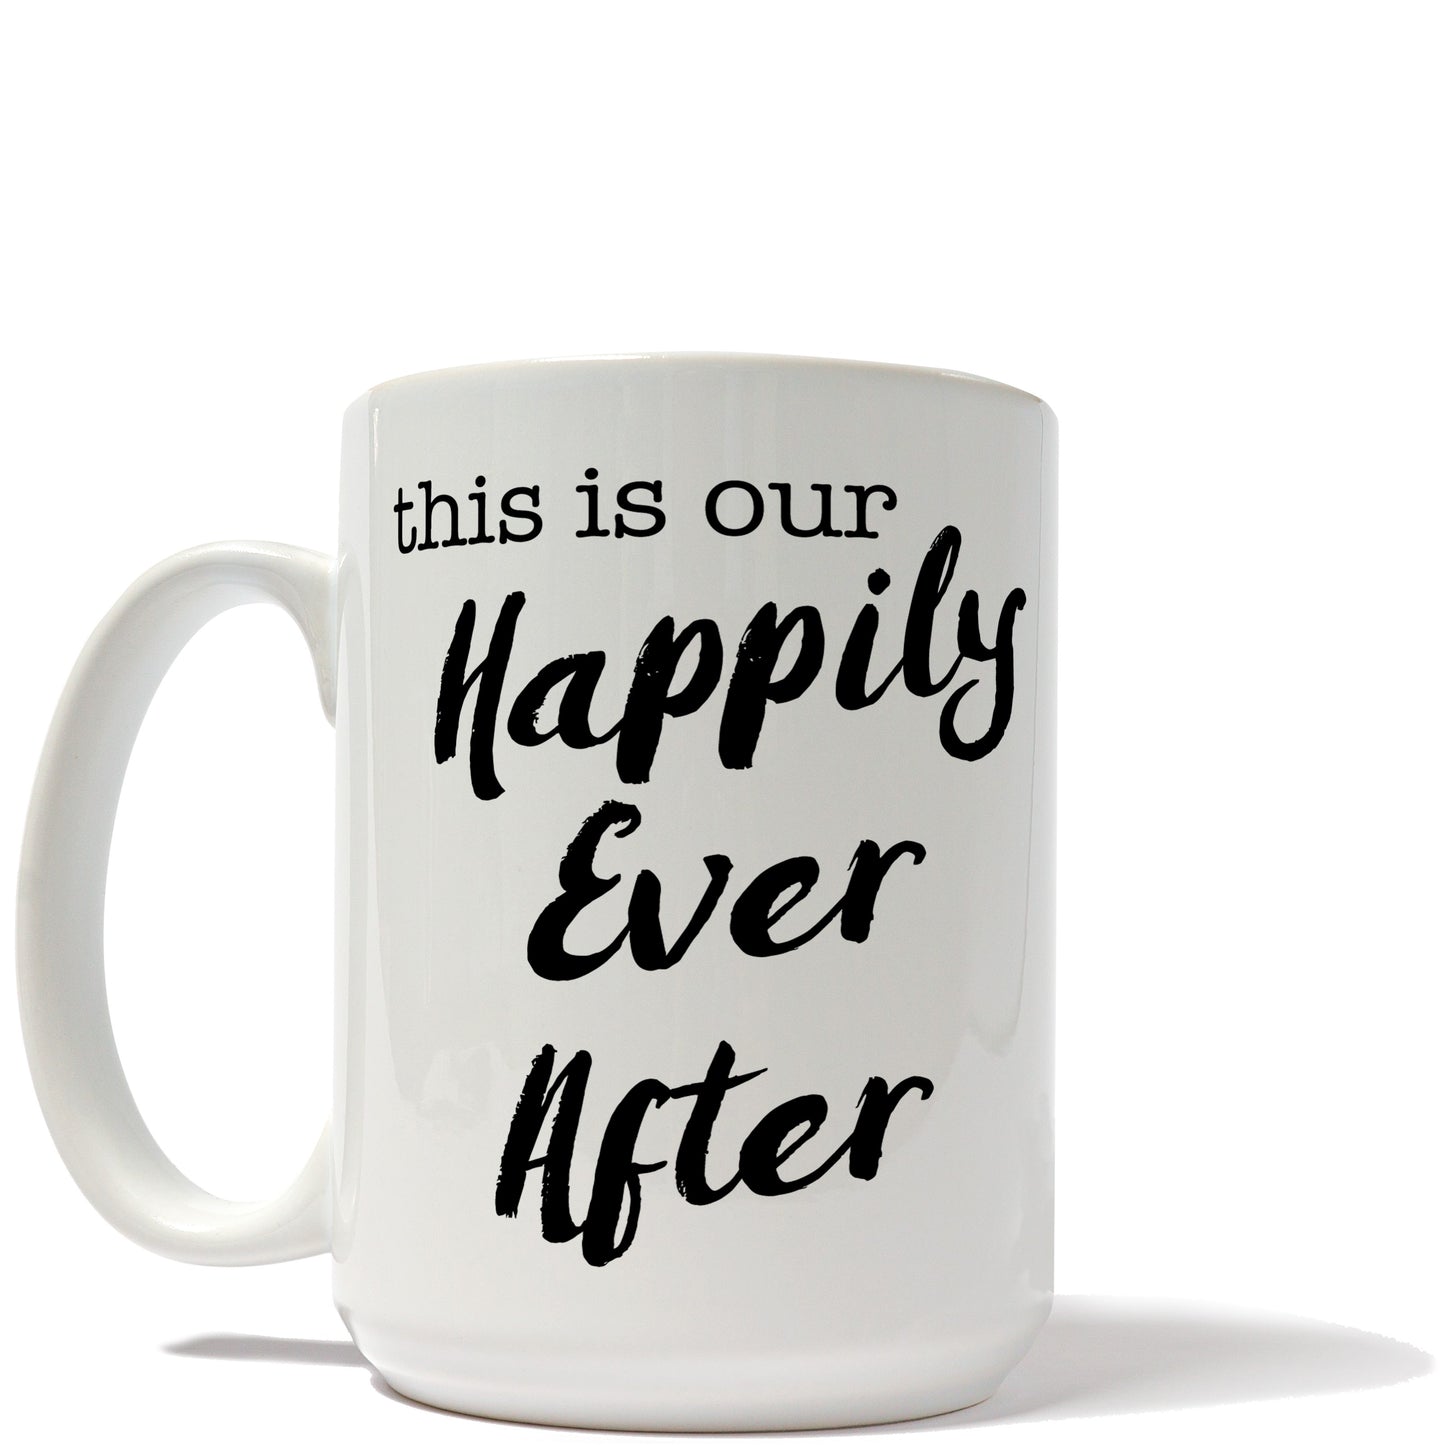 This is Our Happily Ever After Mug